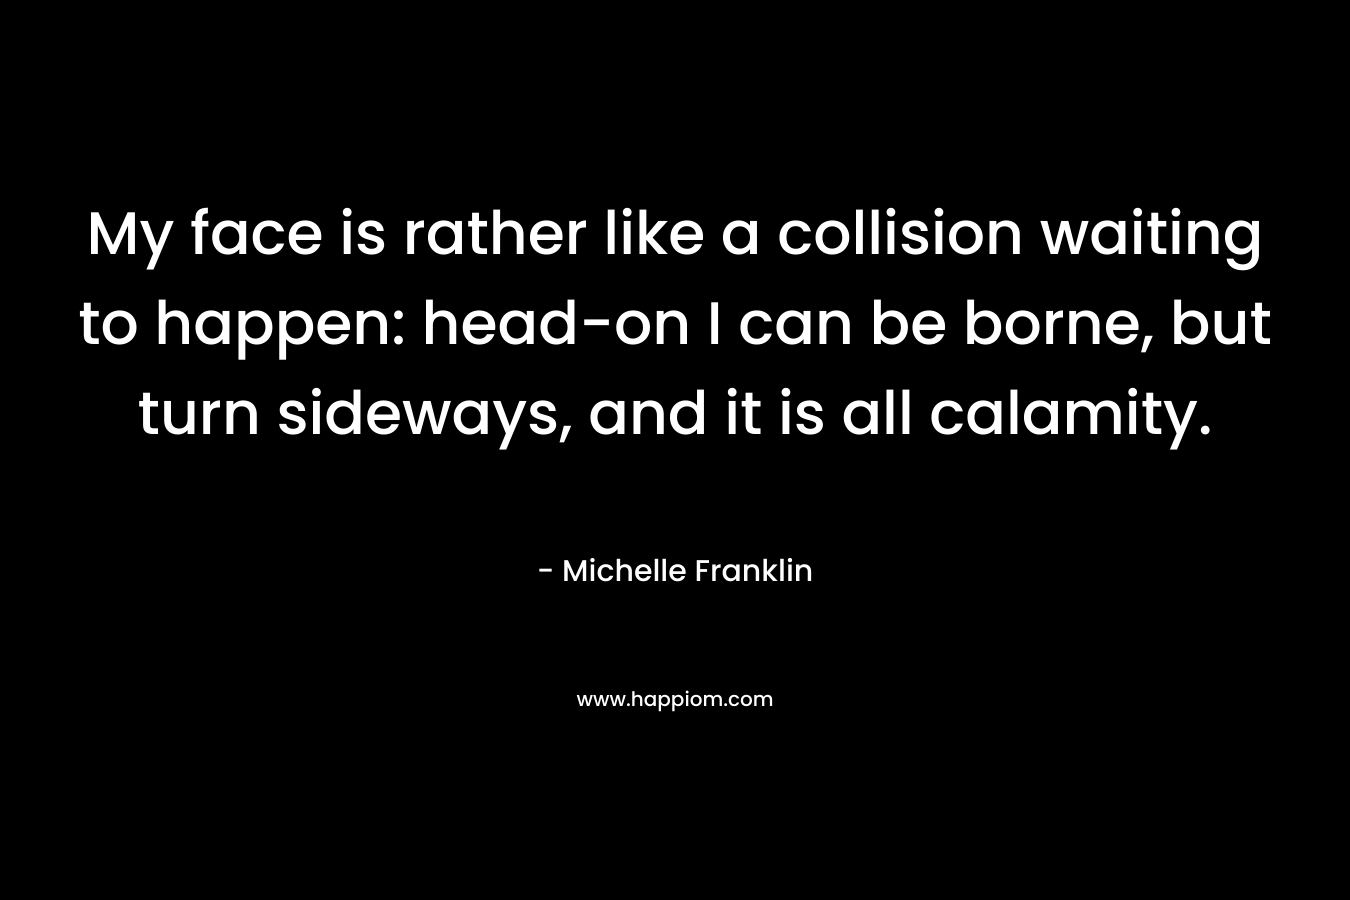 My face is rather like a collision waiting to happen: head-on I can be borne, but turn sideways, and it is all calamity. – Michelle Franklin